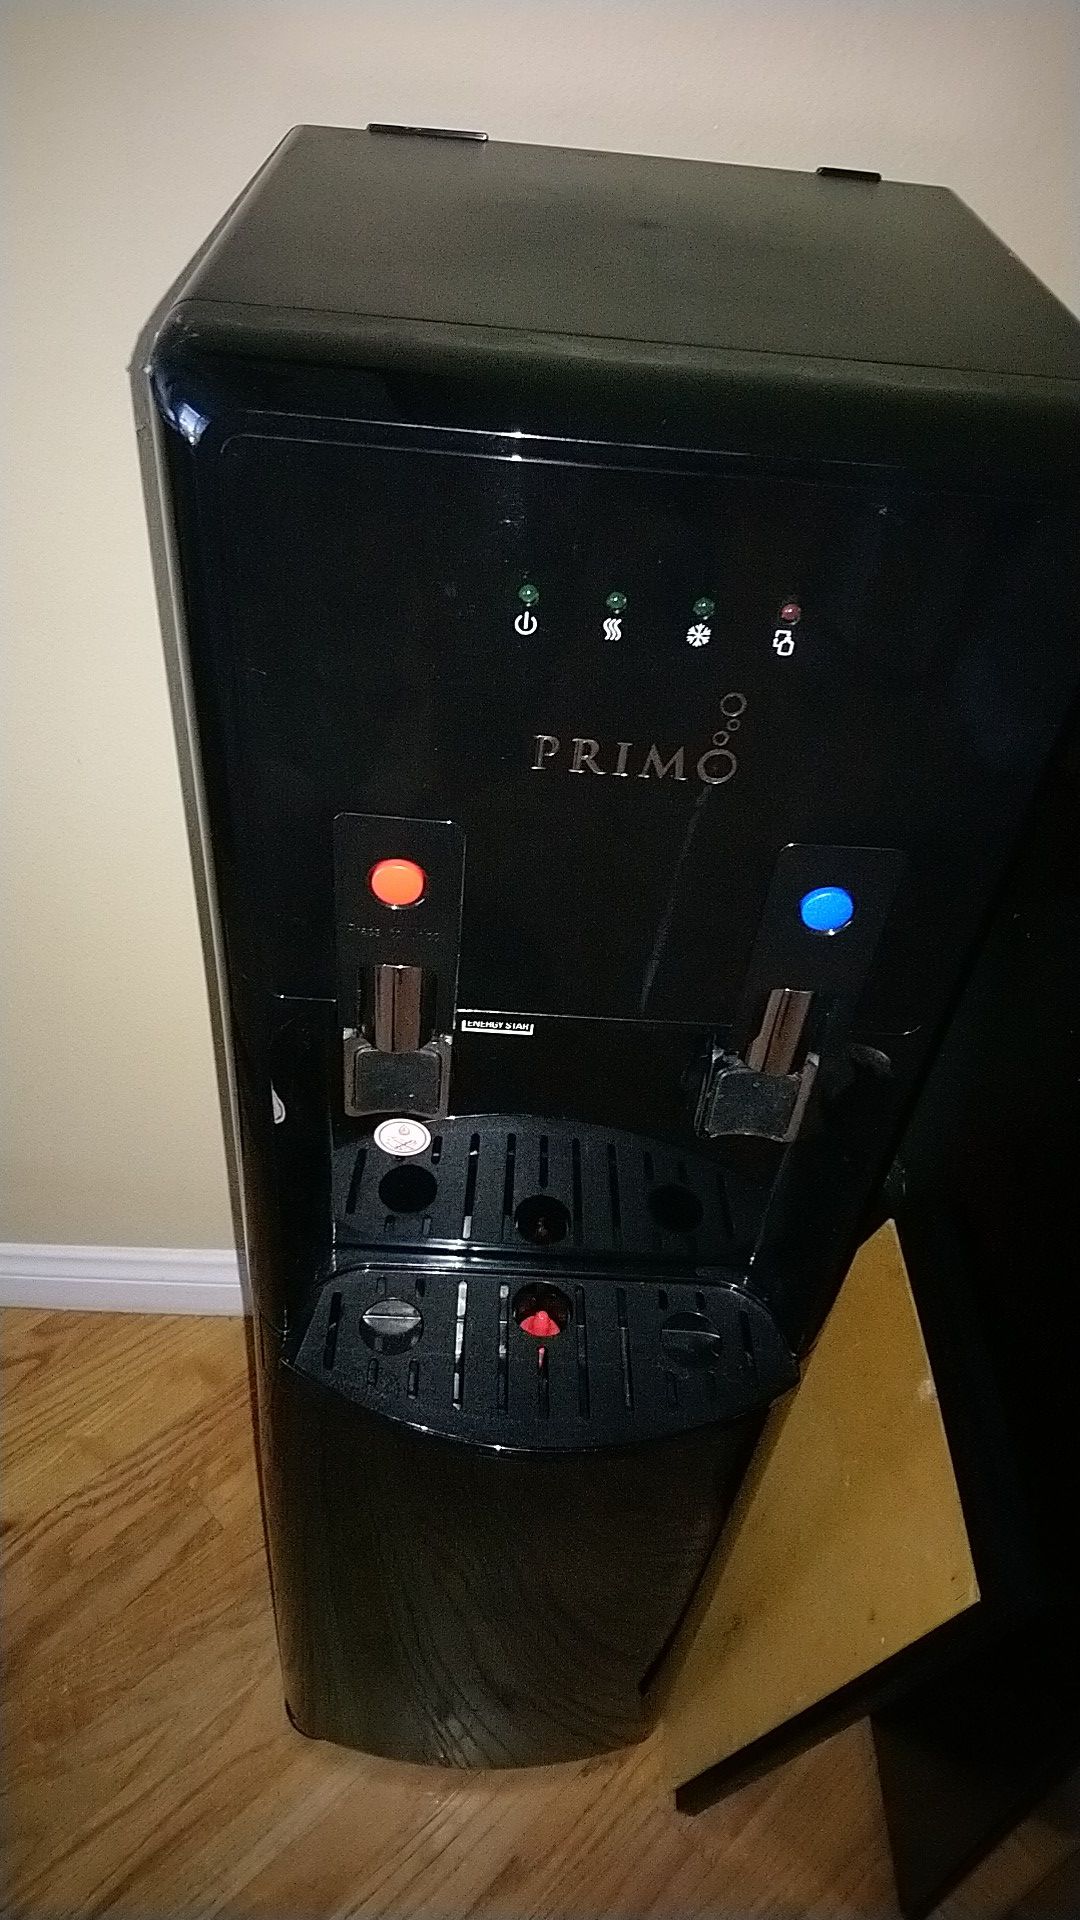 PRIMO Water cooler